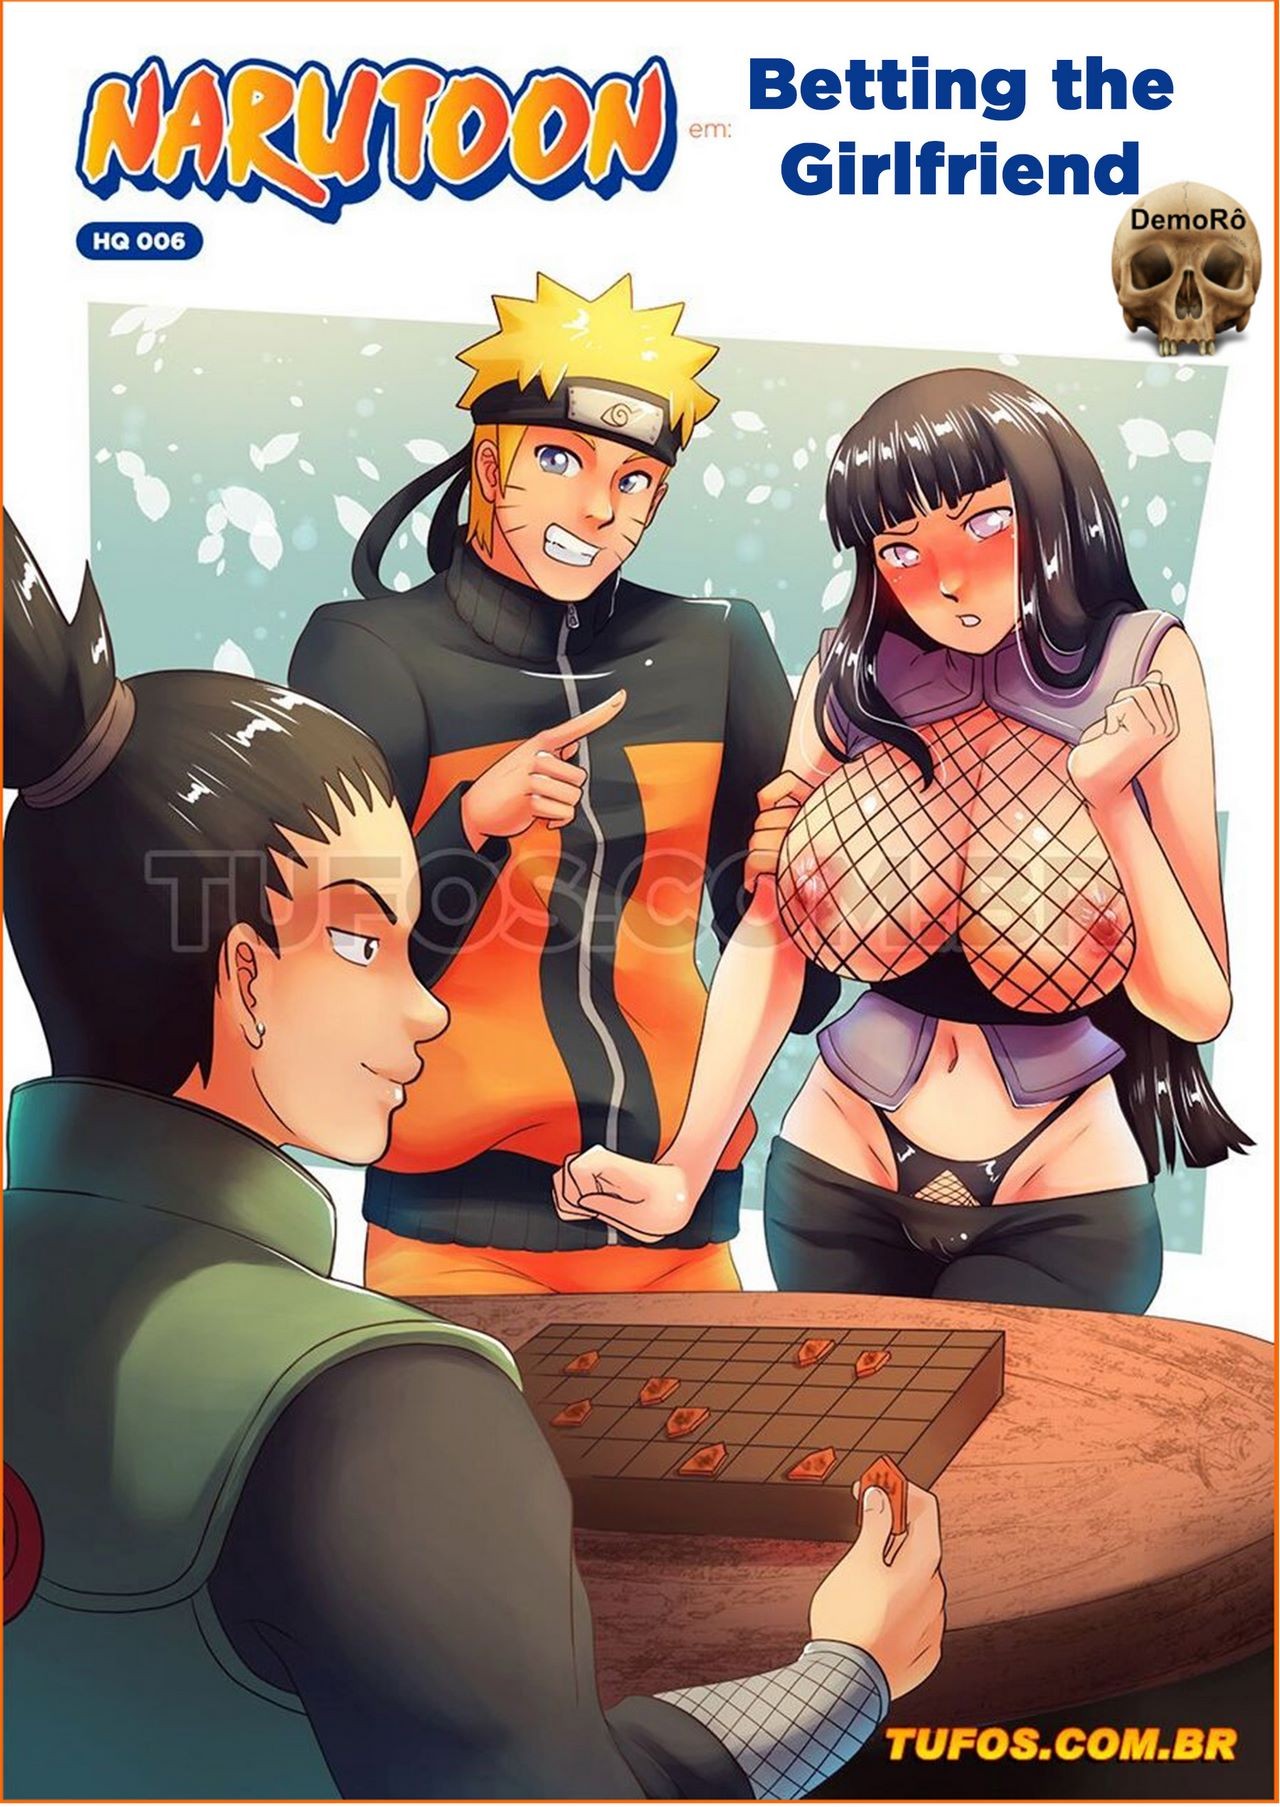 Narutoon 6 - Betting the Girlfriend porn comic picture 1